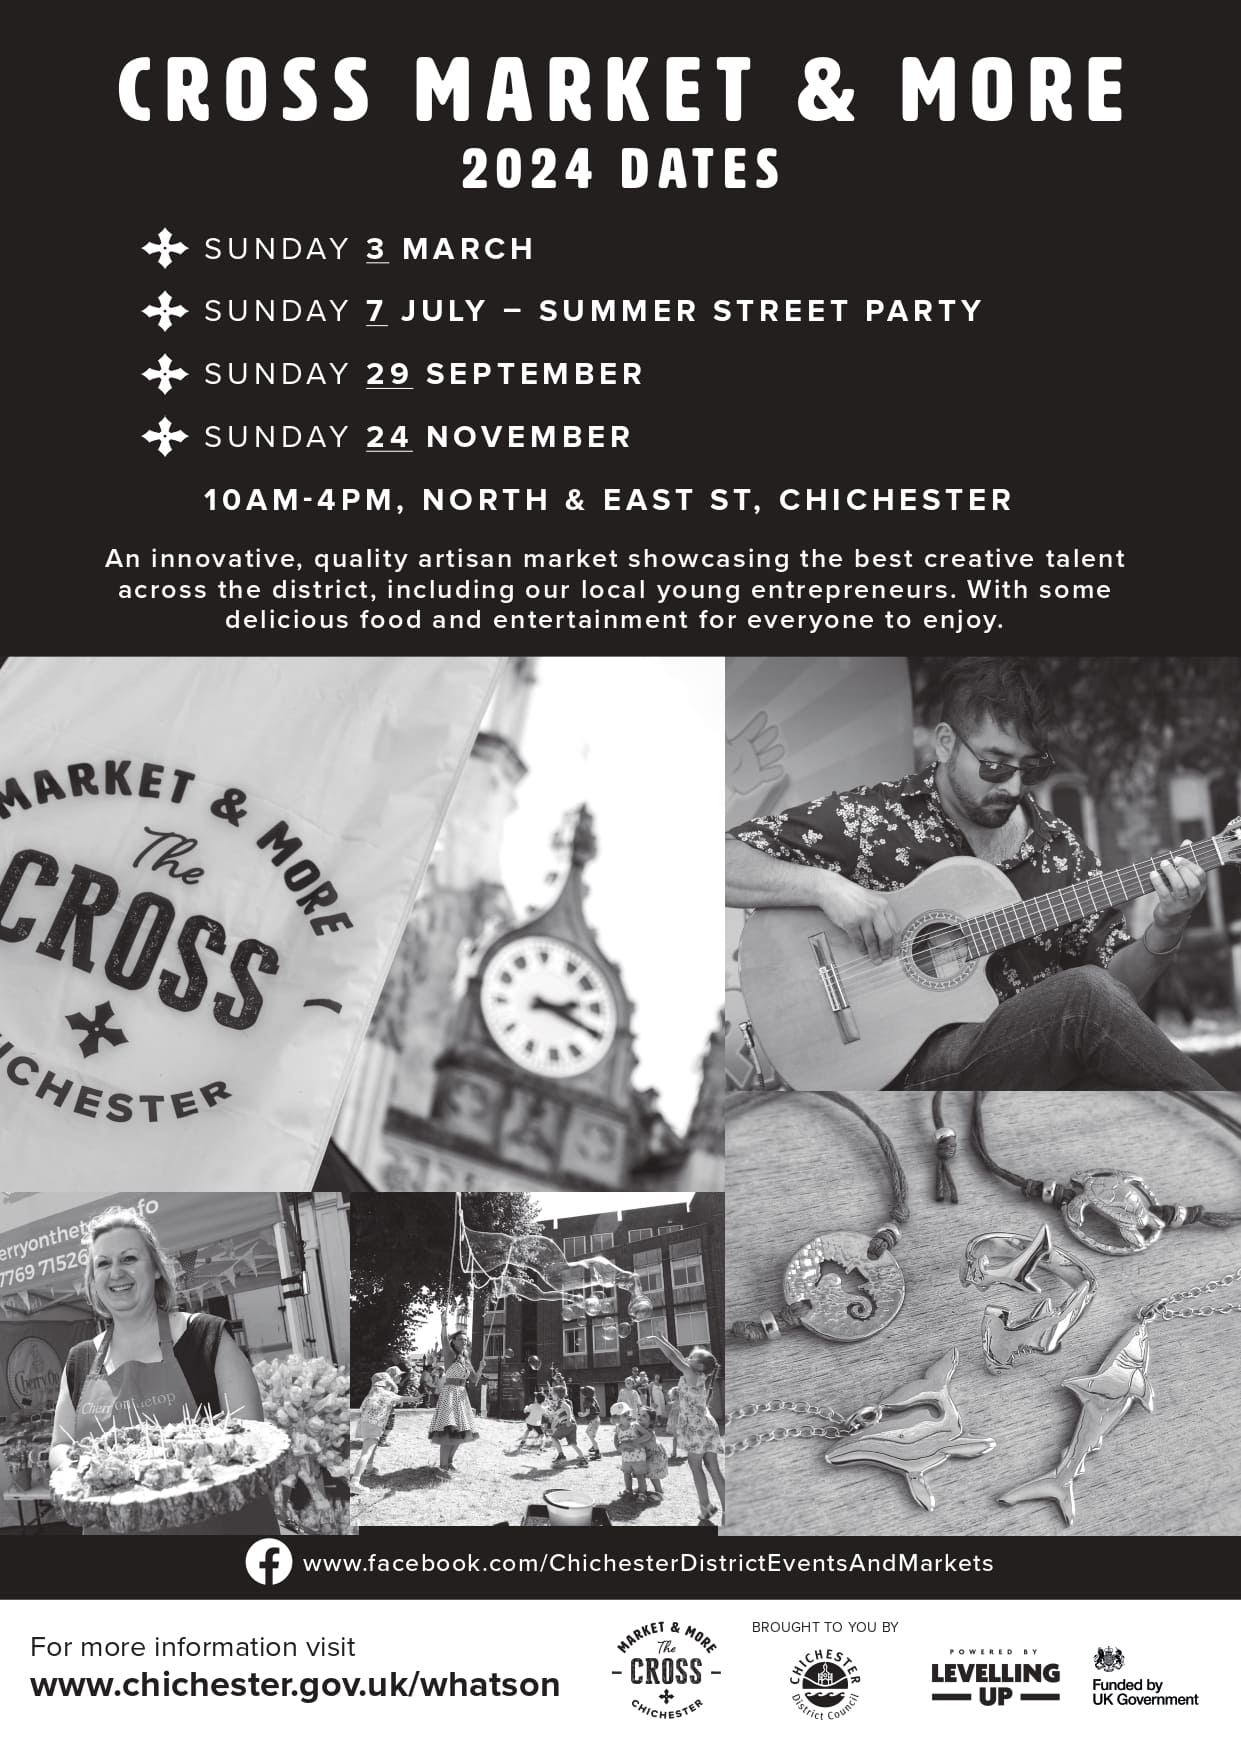 
        cross market and more,
        sunday 3 March 2024,
        sunday 7 July 2024,
        sunday 29 September 2024,
        sunday 24 November 2024;
        10 AM - 4 PM, North & East St, Chichester, UK; 
        west sussex council; 
        cristian herrera guitar